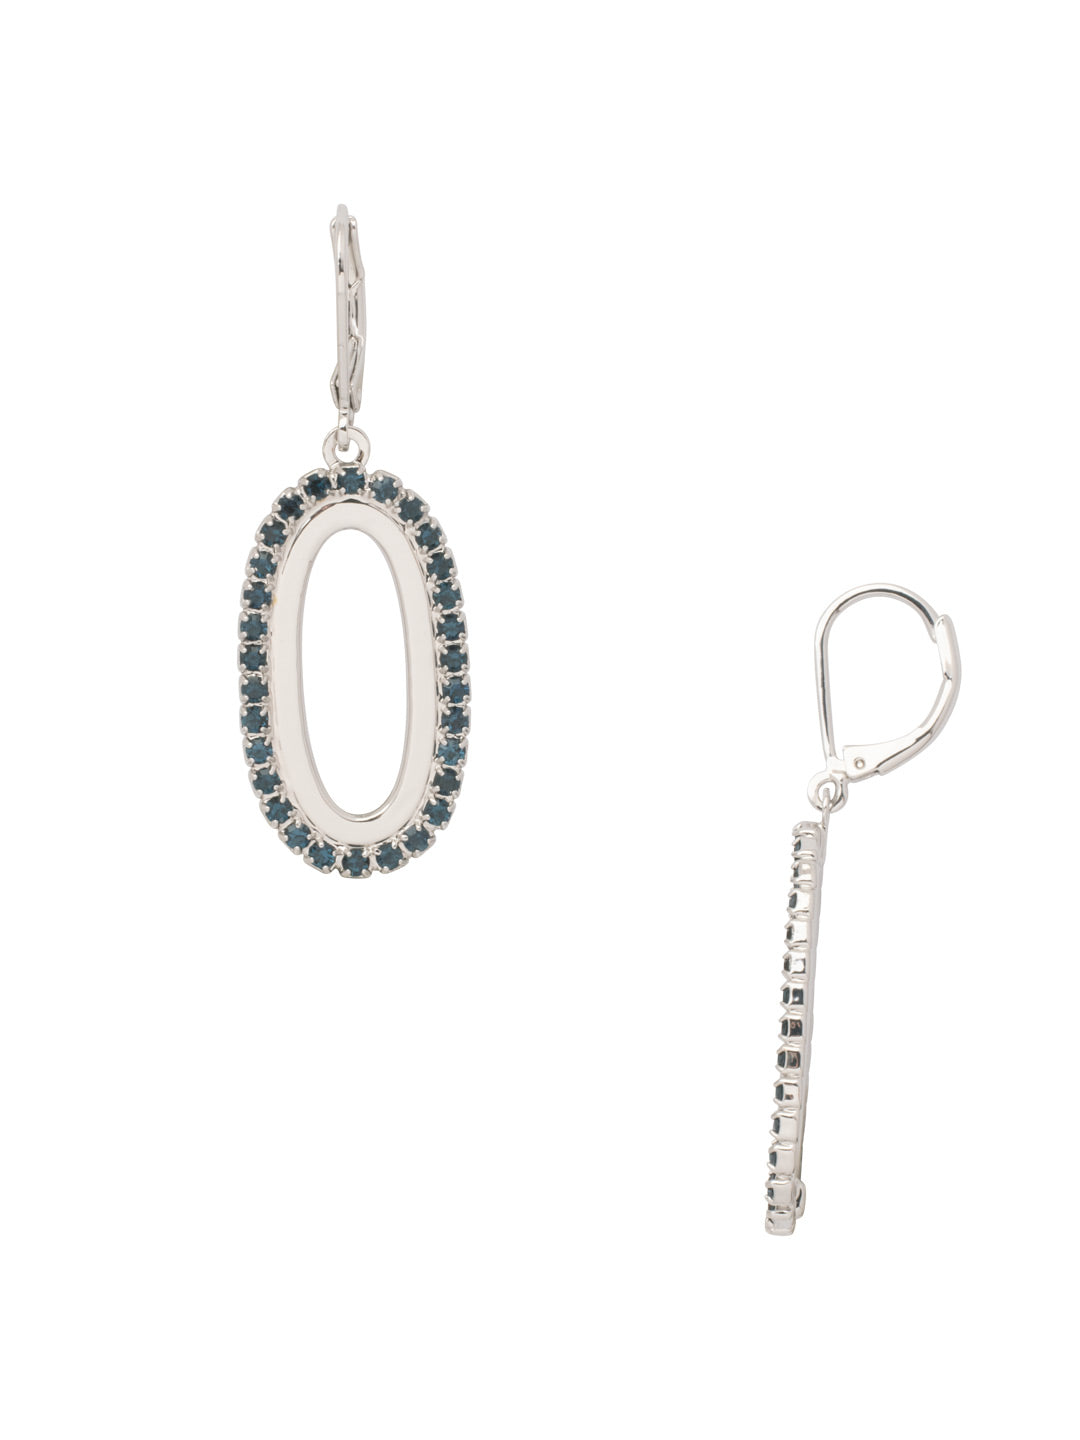 Tori Dangle Earrings - EFL4PDASP - <p>The Tori Dangle Earrings feature a chunky rhinestone embellished chain link on a lever-back French wire. From Sorrelli's Aspen SKY collection in our Palladium finish.</p>